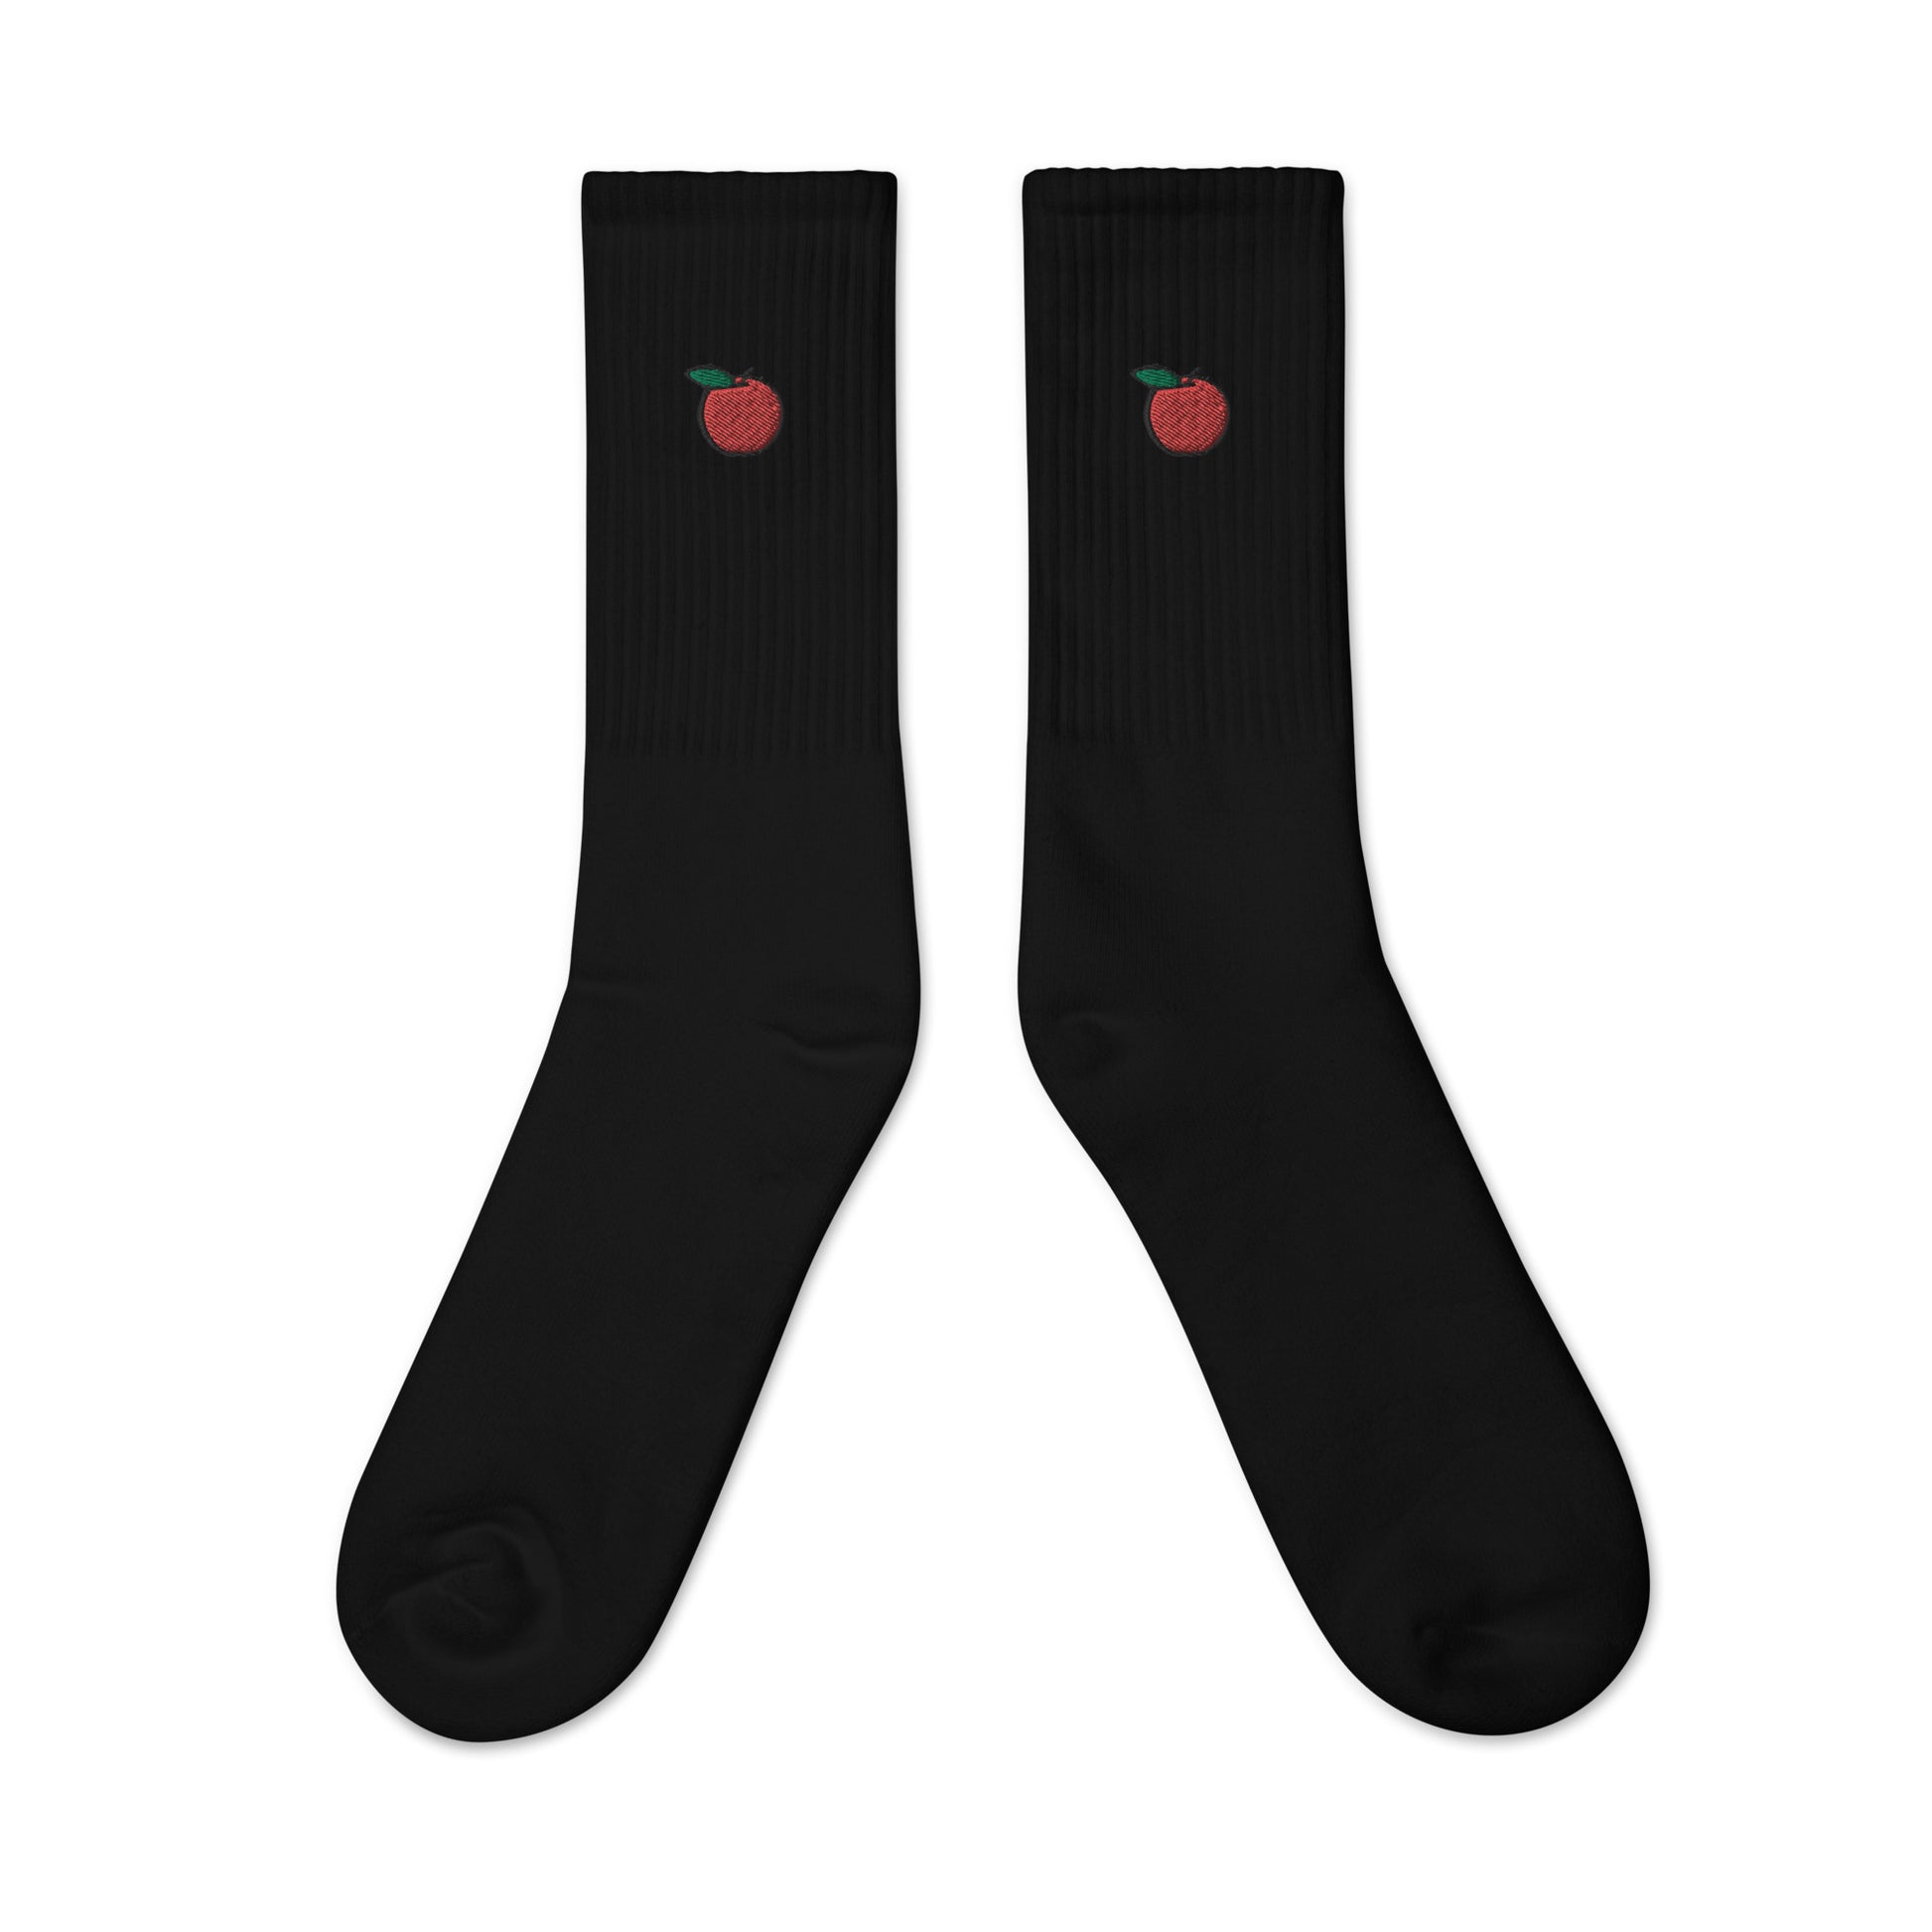 socks-from-the-front-with-apple-fruit-symbol